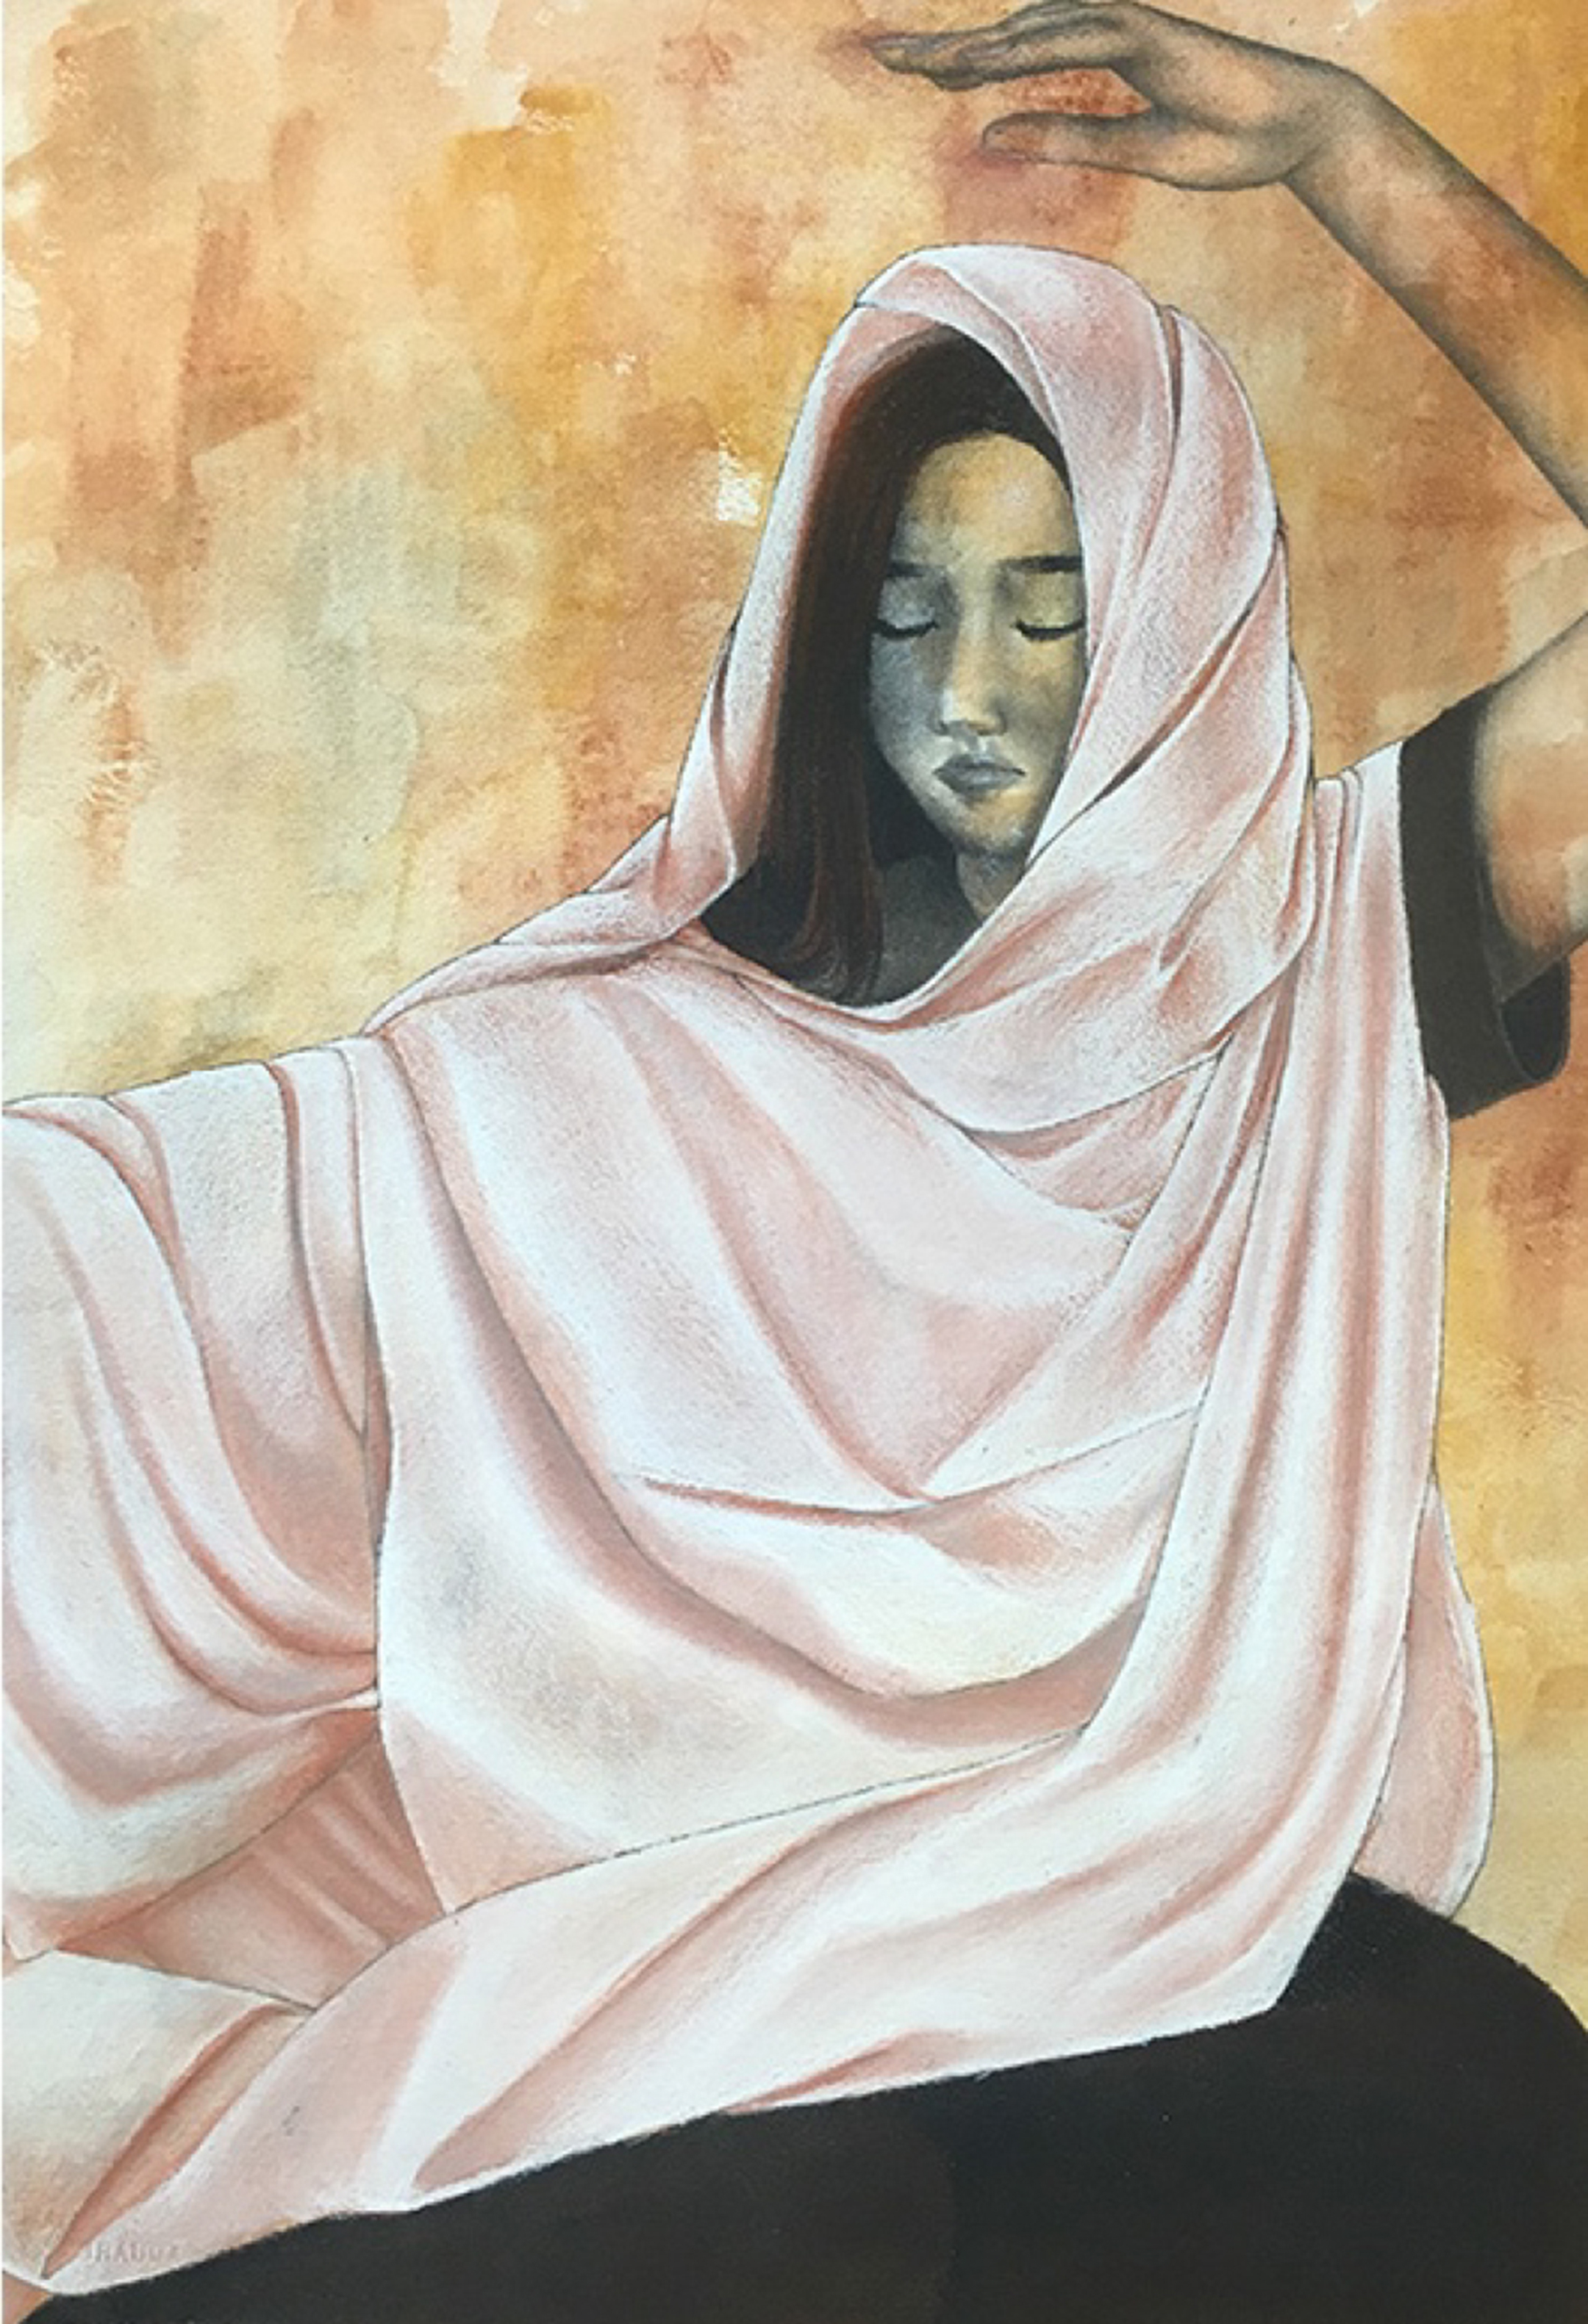 Painting of a young woman from the waist up draped in a white fabric covering everything but her face